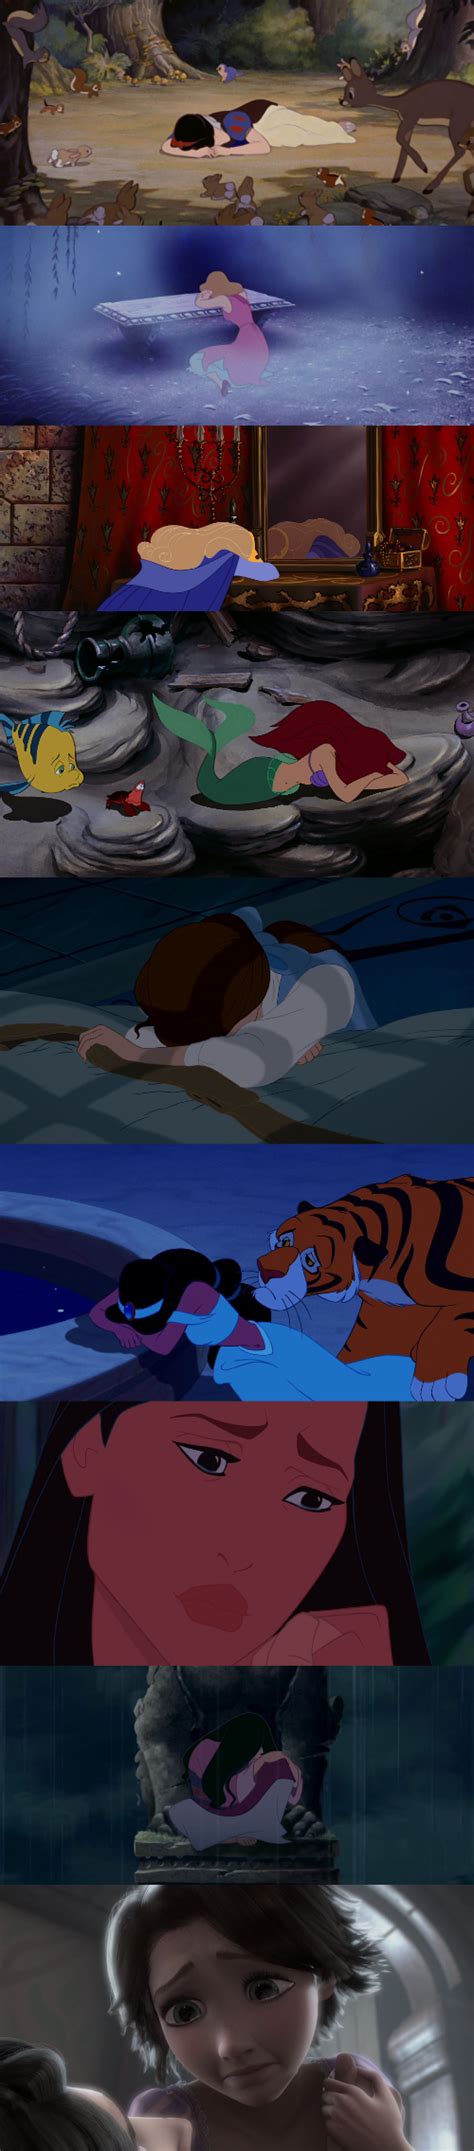 Disney Princesses Crying Over A Guy By Nikki1975 On Deviantart